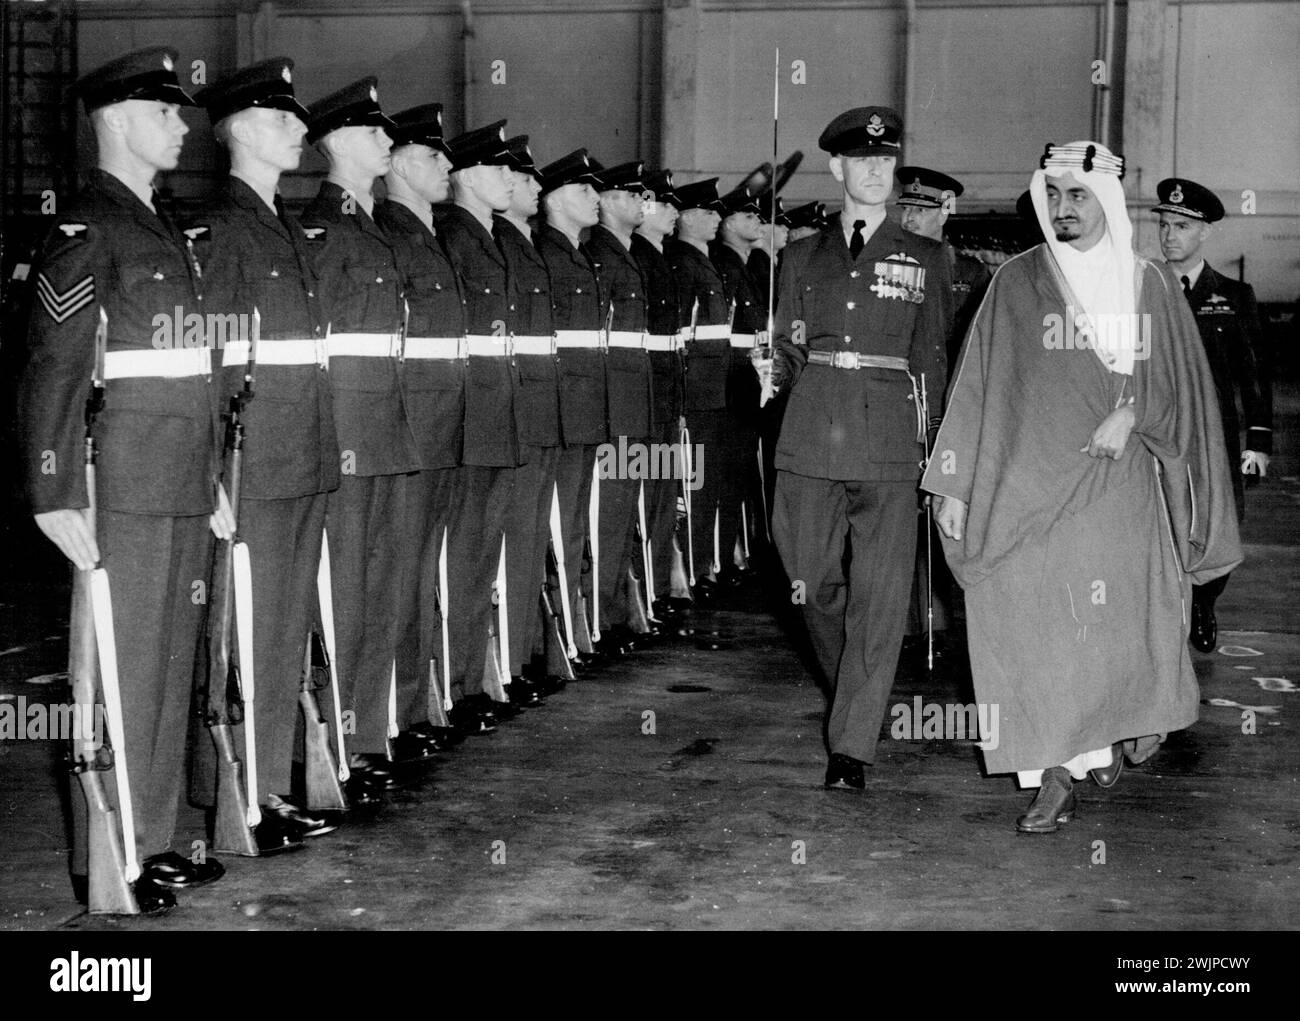 Prince from Arabia -- With the Dude of Gloucester who was there to Receive him on Behalf of the King, the Emir Feisal Inspects the R.A.F. Guard of Honour on his Arrival at Northolt Airport this Morning. One of the More Spectacular Arab Princes?, Emir Feisal, second son of king IBN Saud of Saudi Arabia, Came to London to-day. As his Country's Foreign Minister, he has Arrived on an Official Ten-day Visit as guest of the British Government. Tomorrow August 8th, he will dine with Mr. Morrison, British Foreign Secretary, at his Carlton Gardens Residence. August 7, 1951. (Photo by Paul Popper). Stock Photo